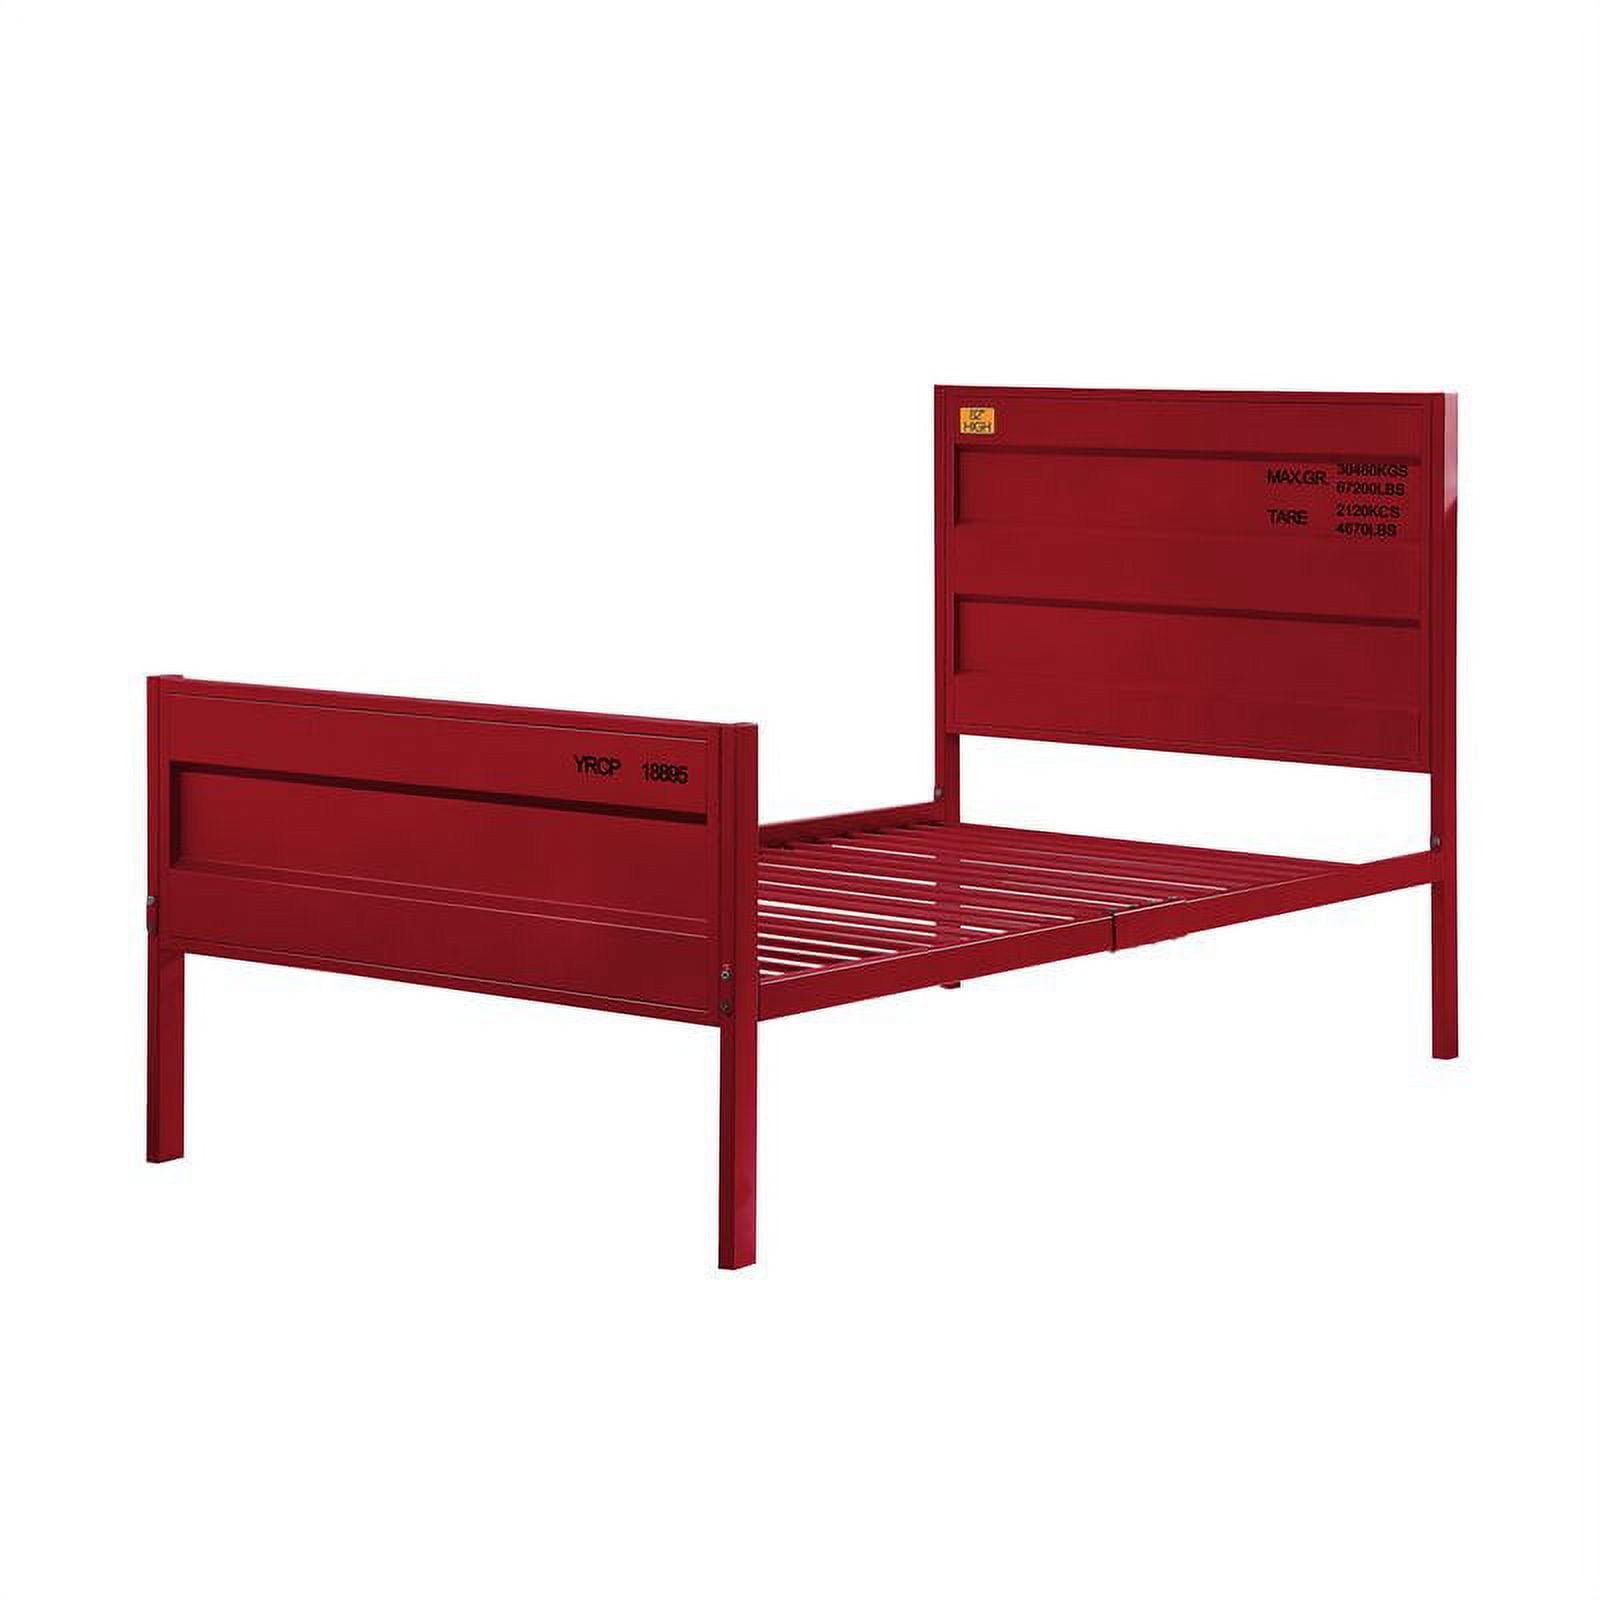 Picture of ACME Furniture 35945F Metal Cargo Full Bed, Red - 79 x 56 x 44 in.